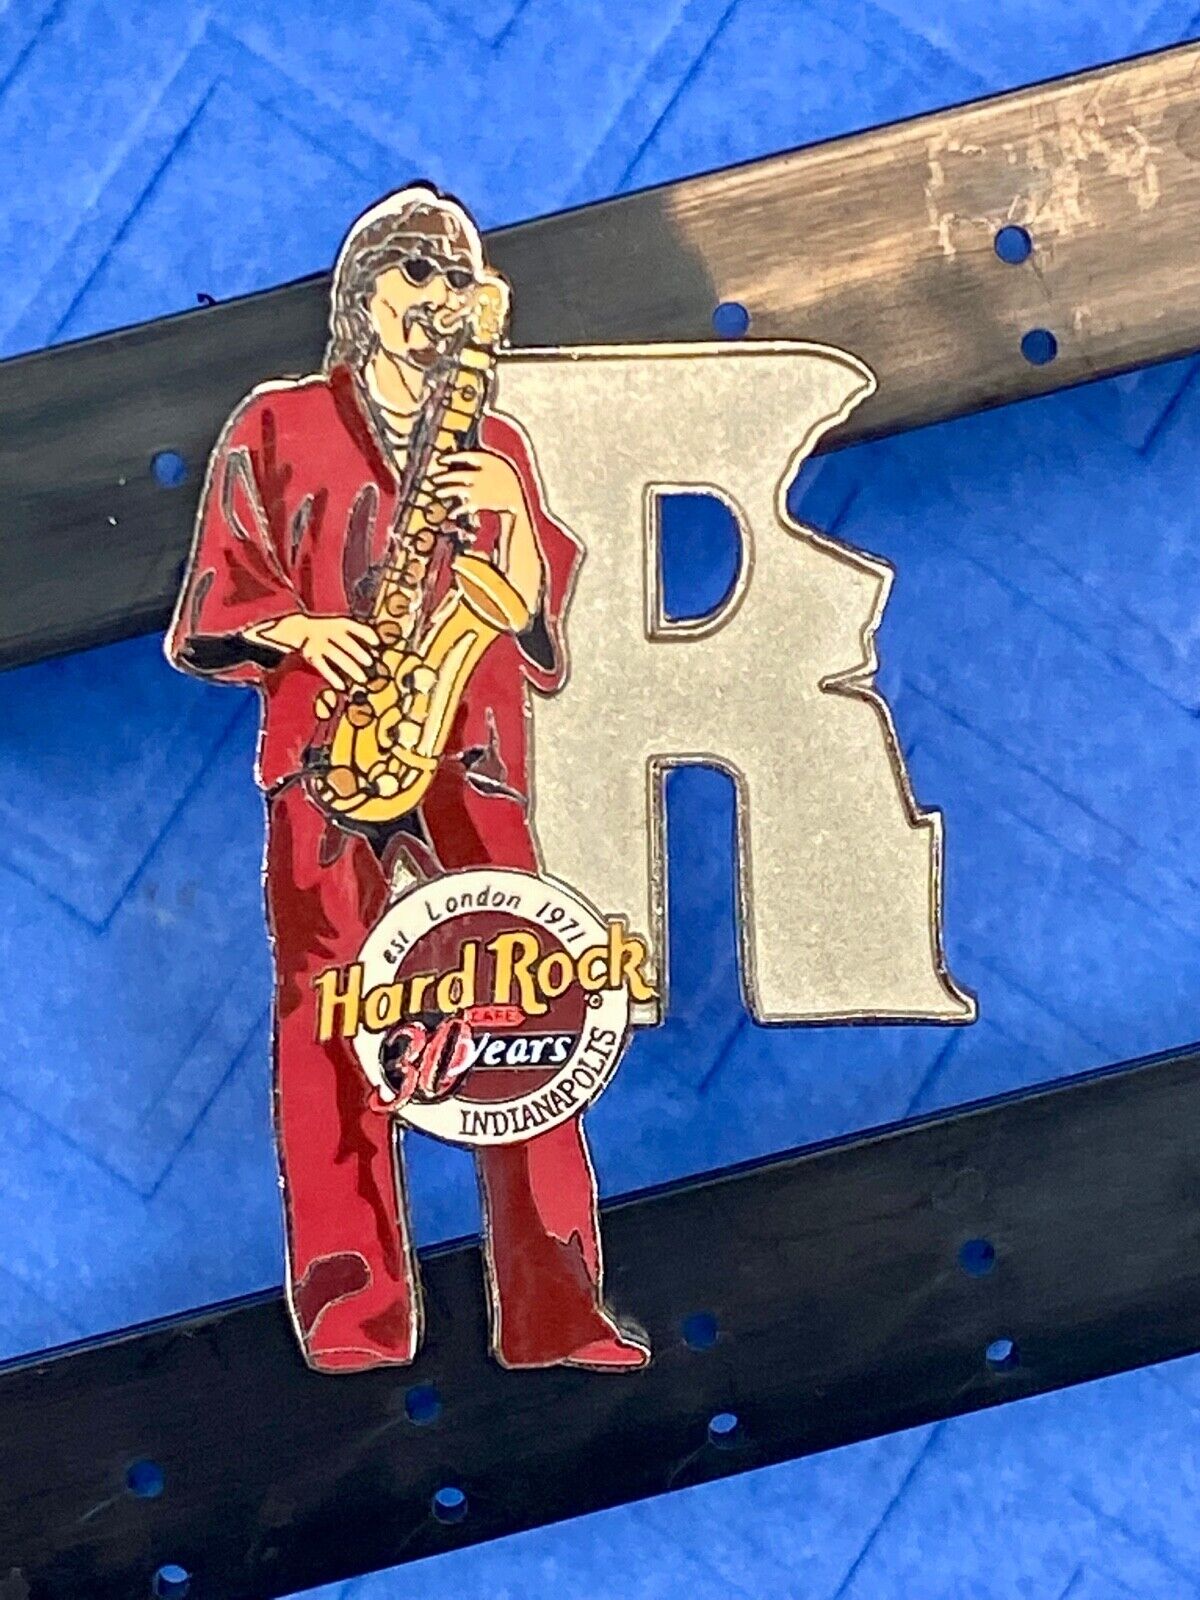 Hard Rock Cafe Collectors pin - Indianapolis 30 year letter R - Saxophone Sax